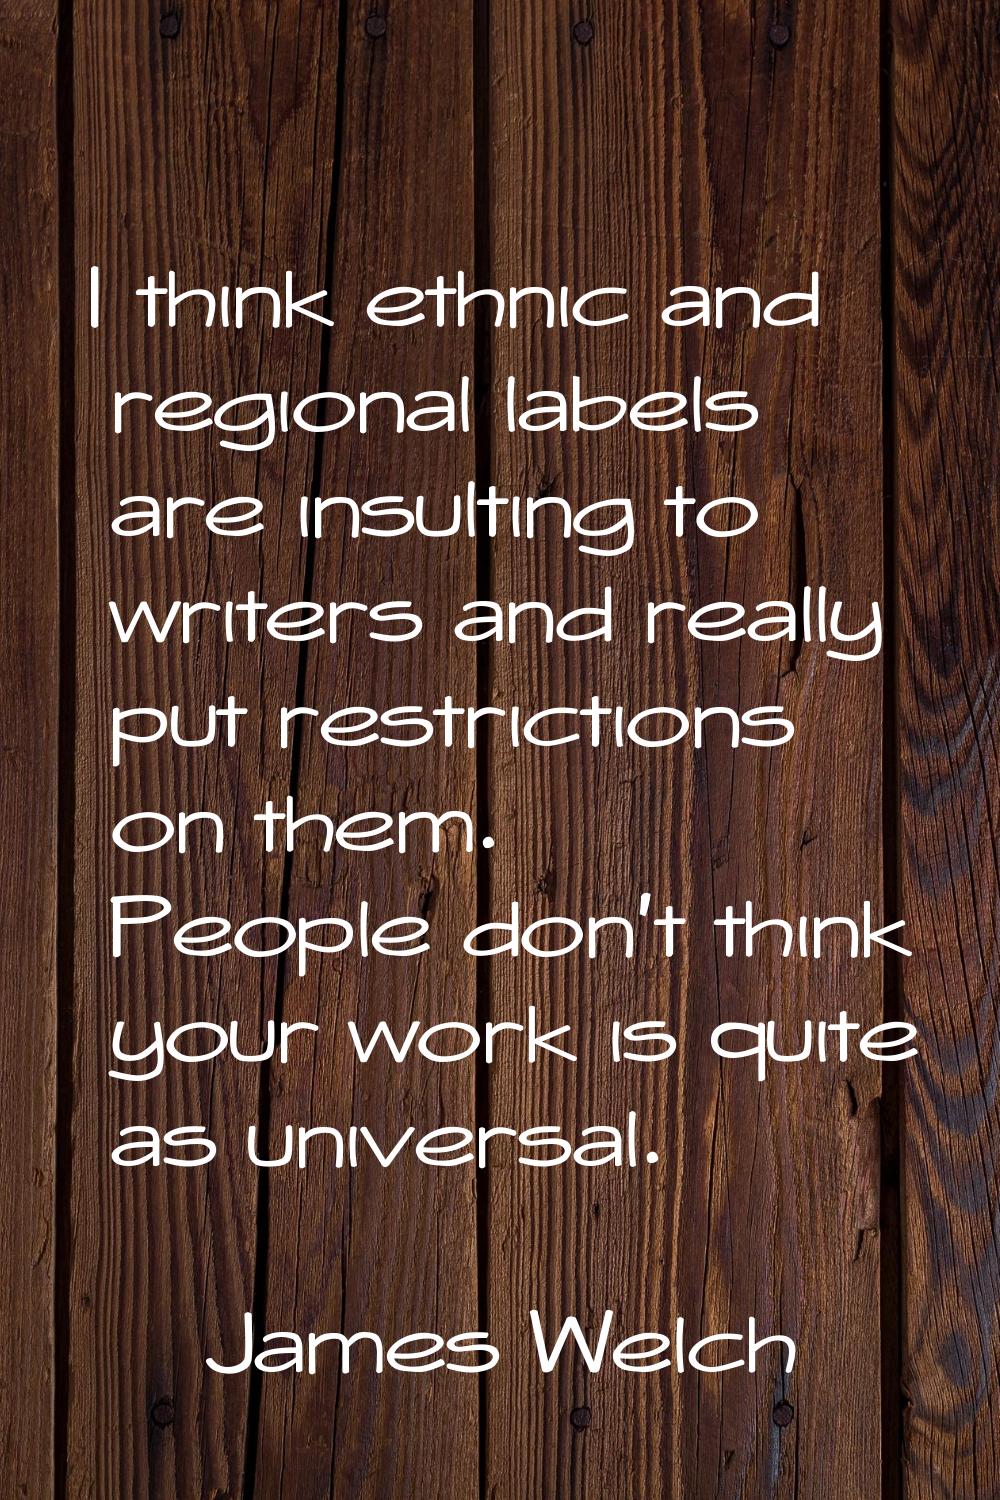 I think ethnic and regional labels are insulting to writers and really put restrictions on them. Pe